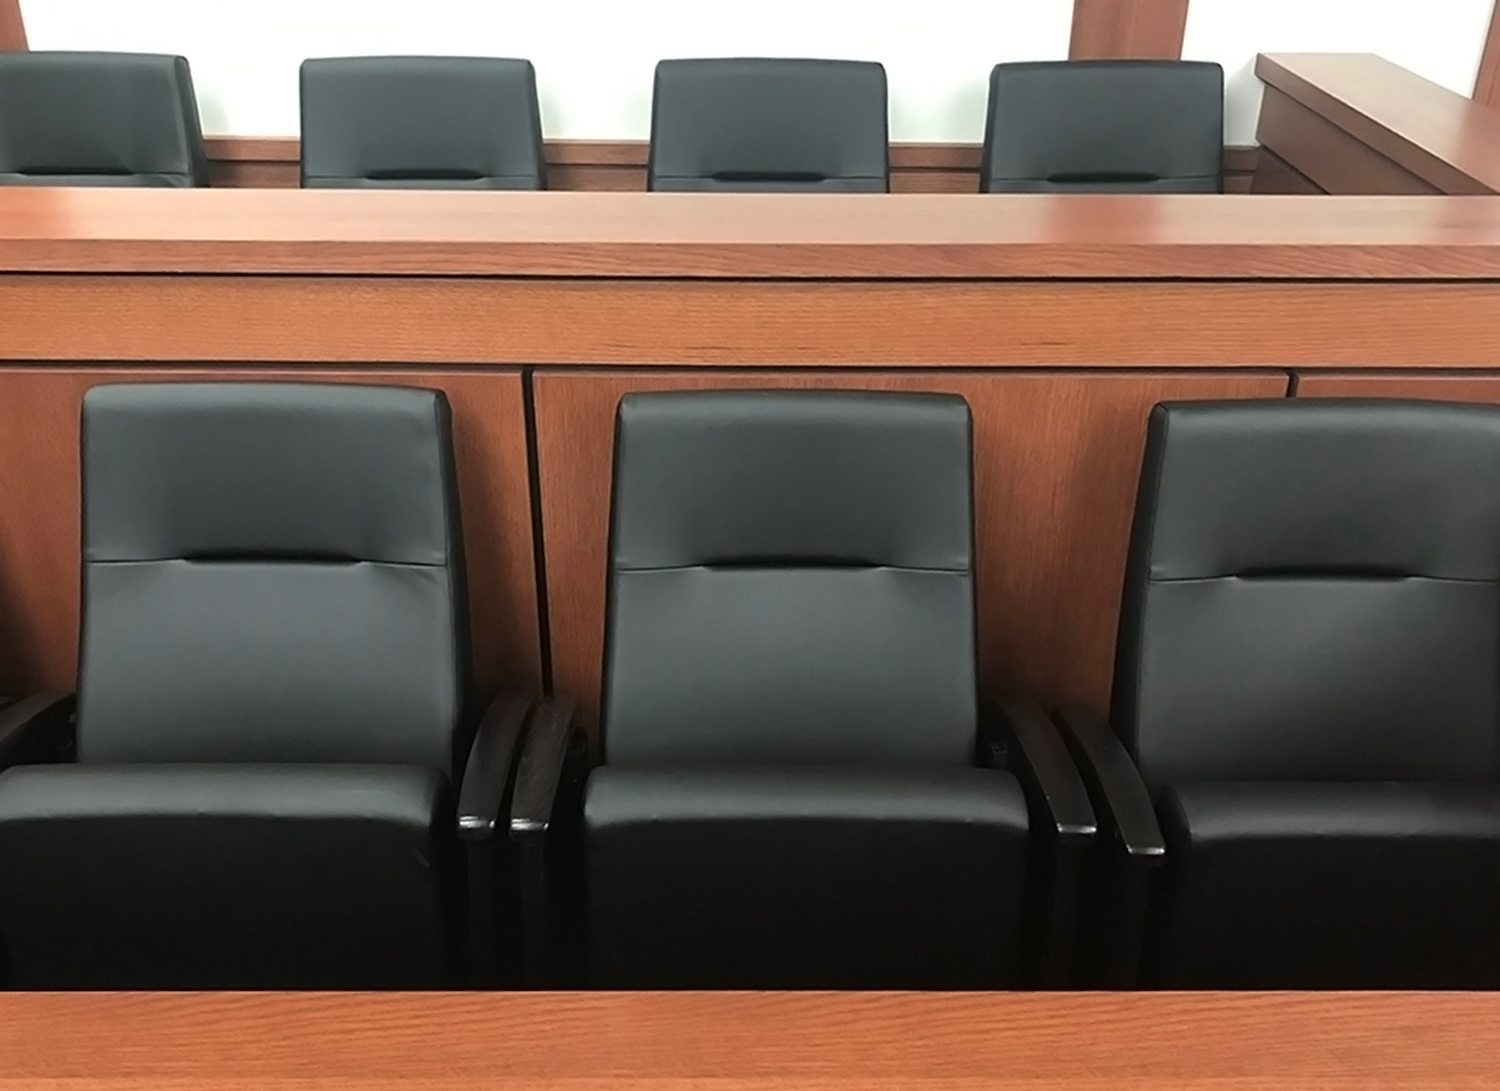 Clarity Back Jury Seats in Clarence Mitchell Courthouse - Baltimore, MD